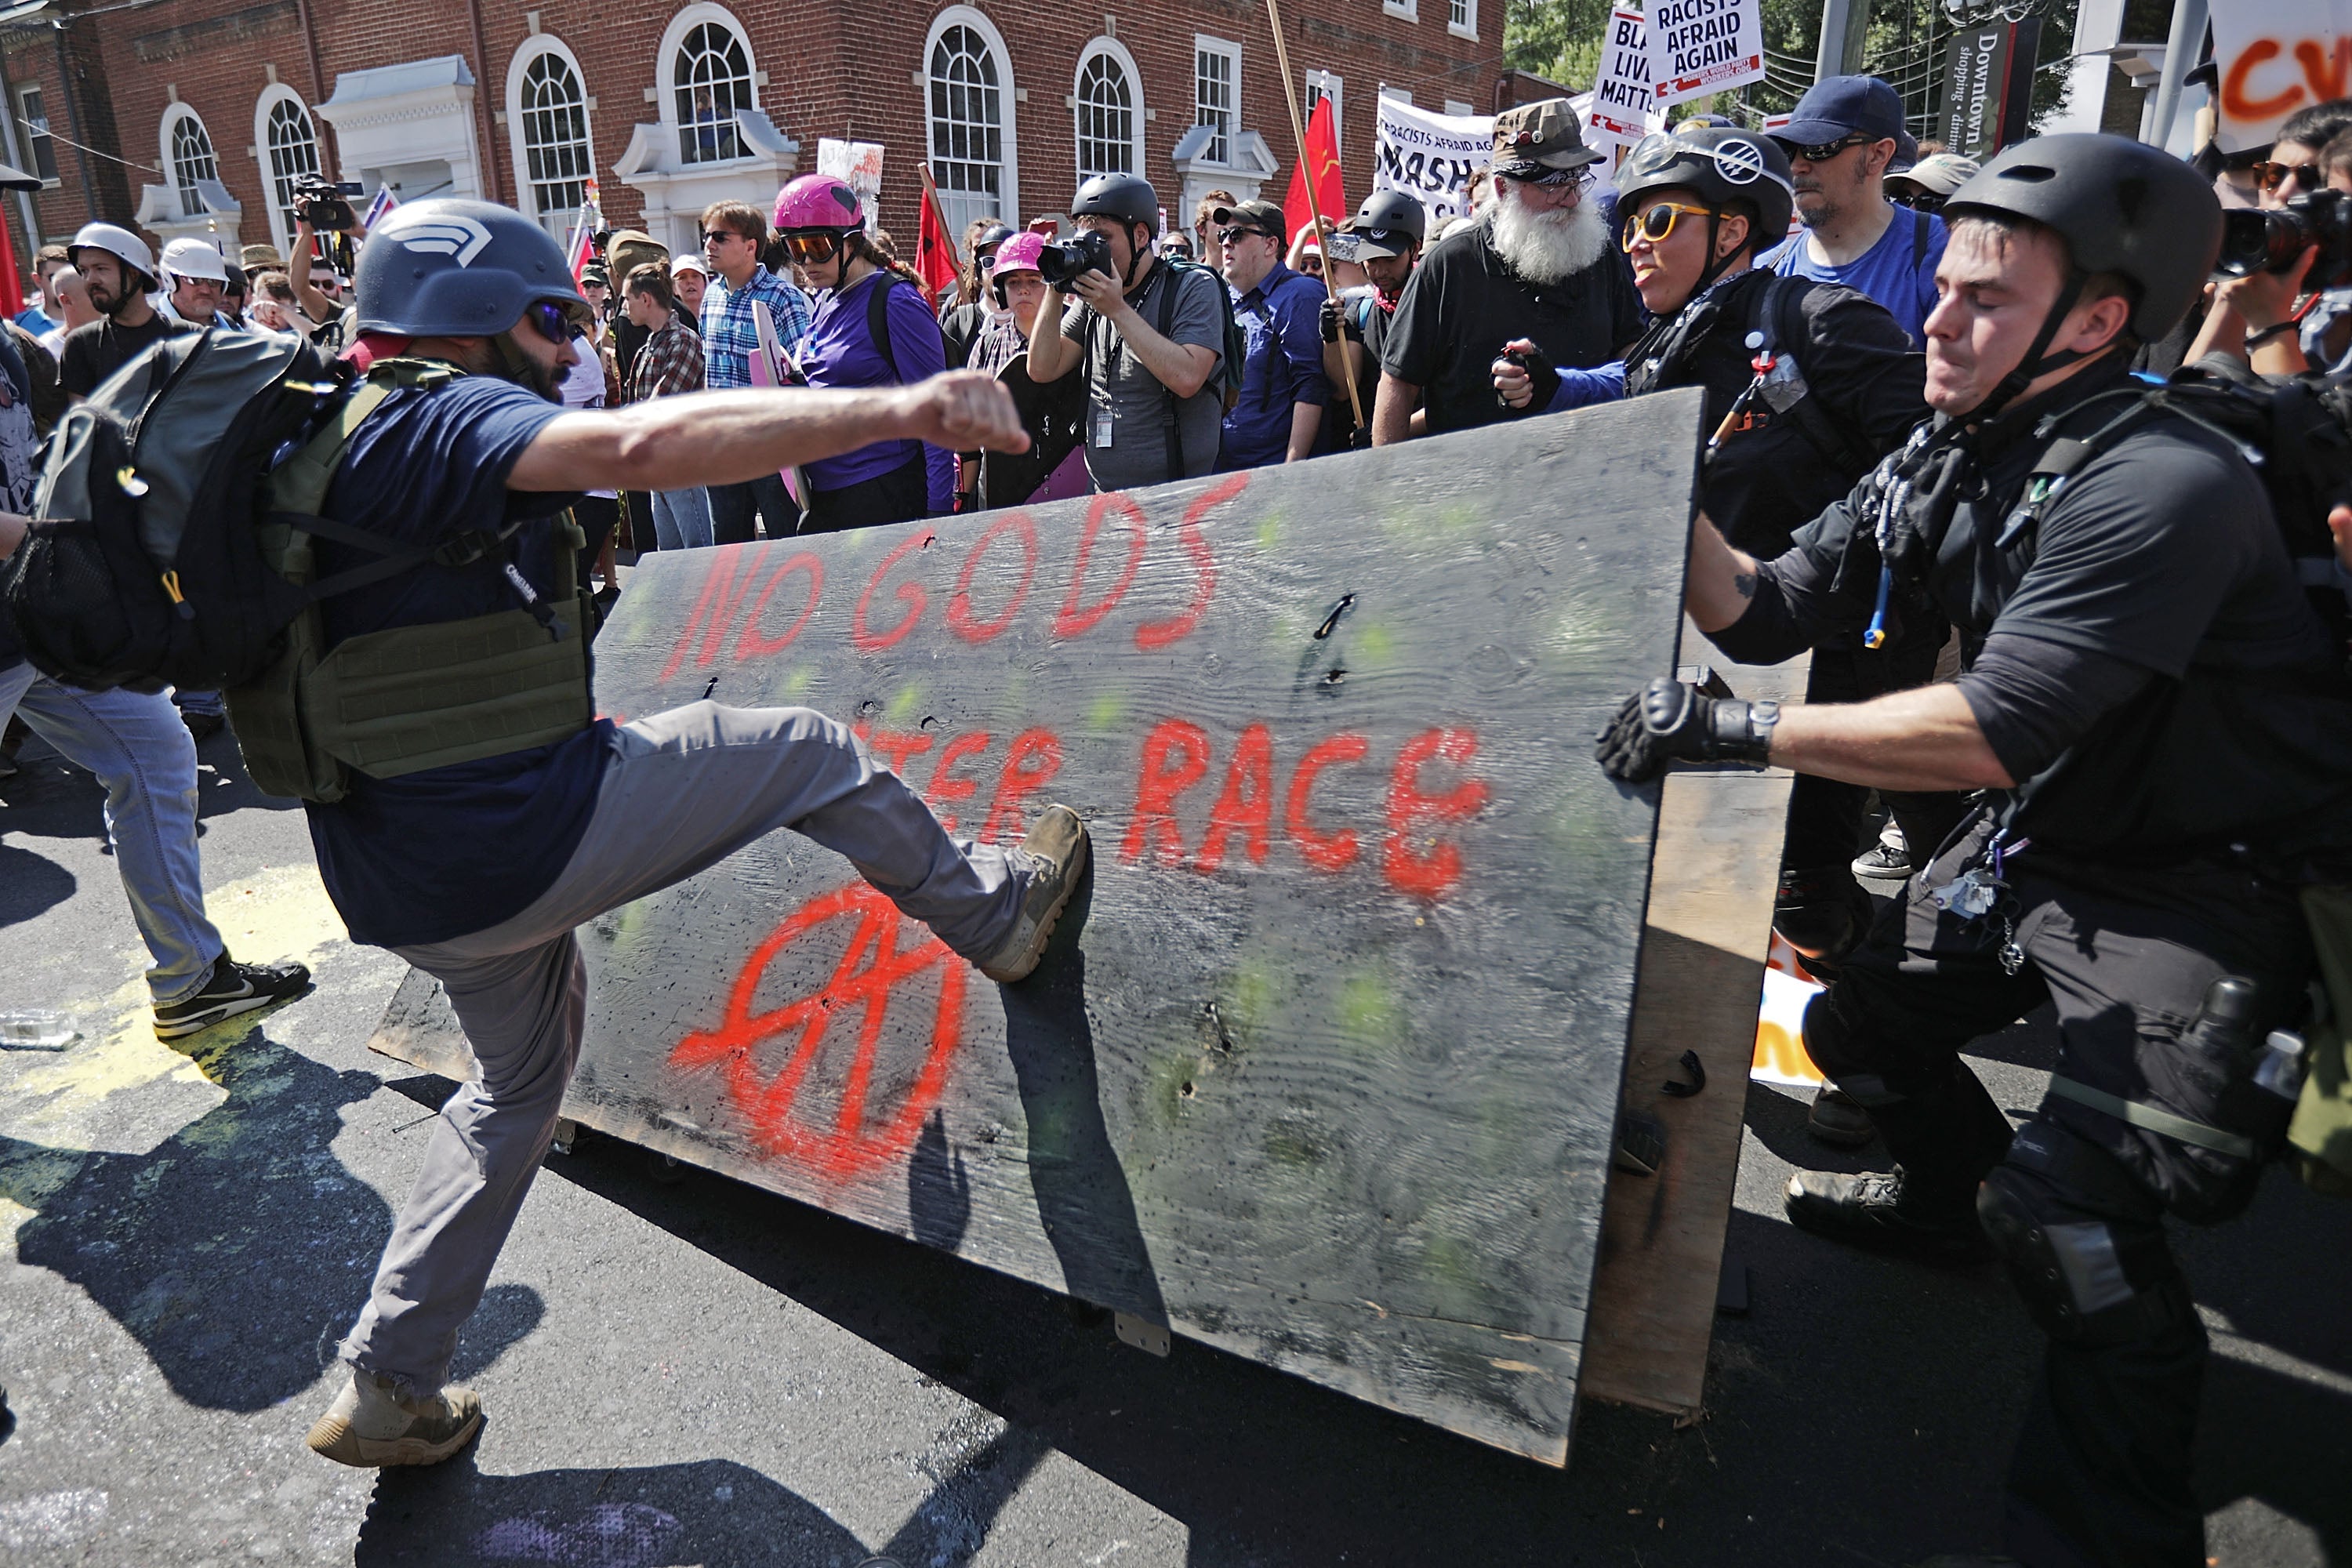 Virginia Governor Declares State Of Emergency After Violent Clashes At White Nationalist Rally